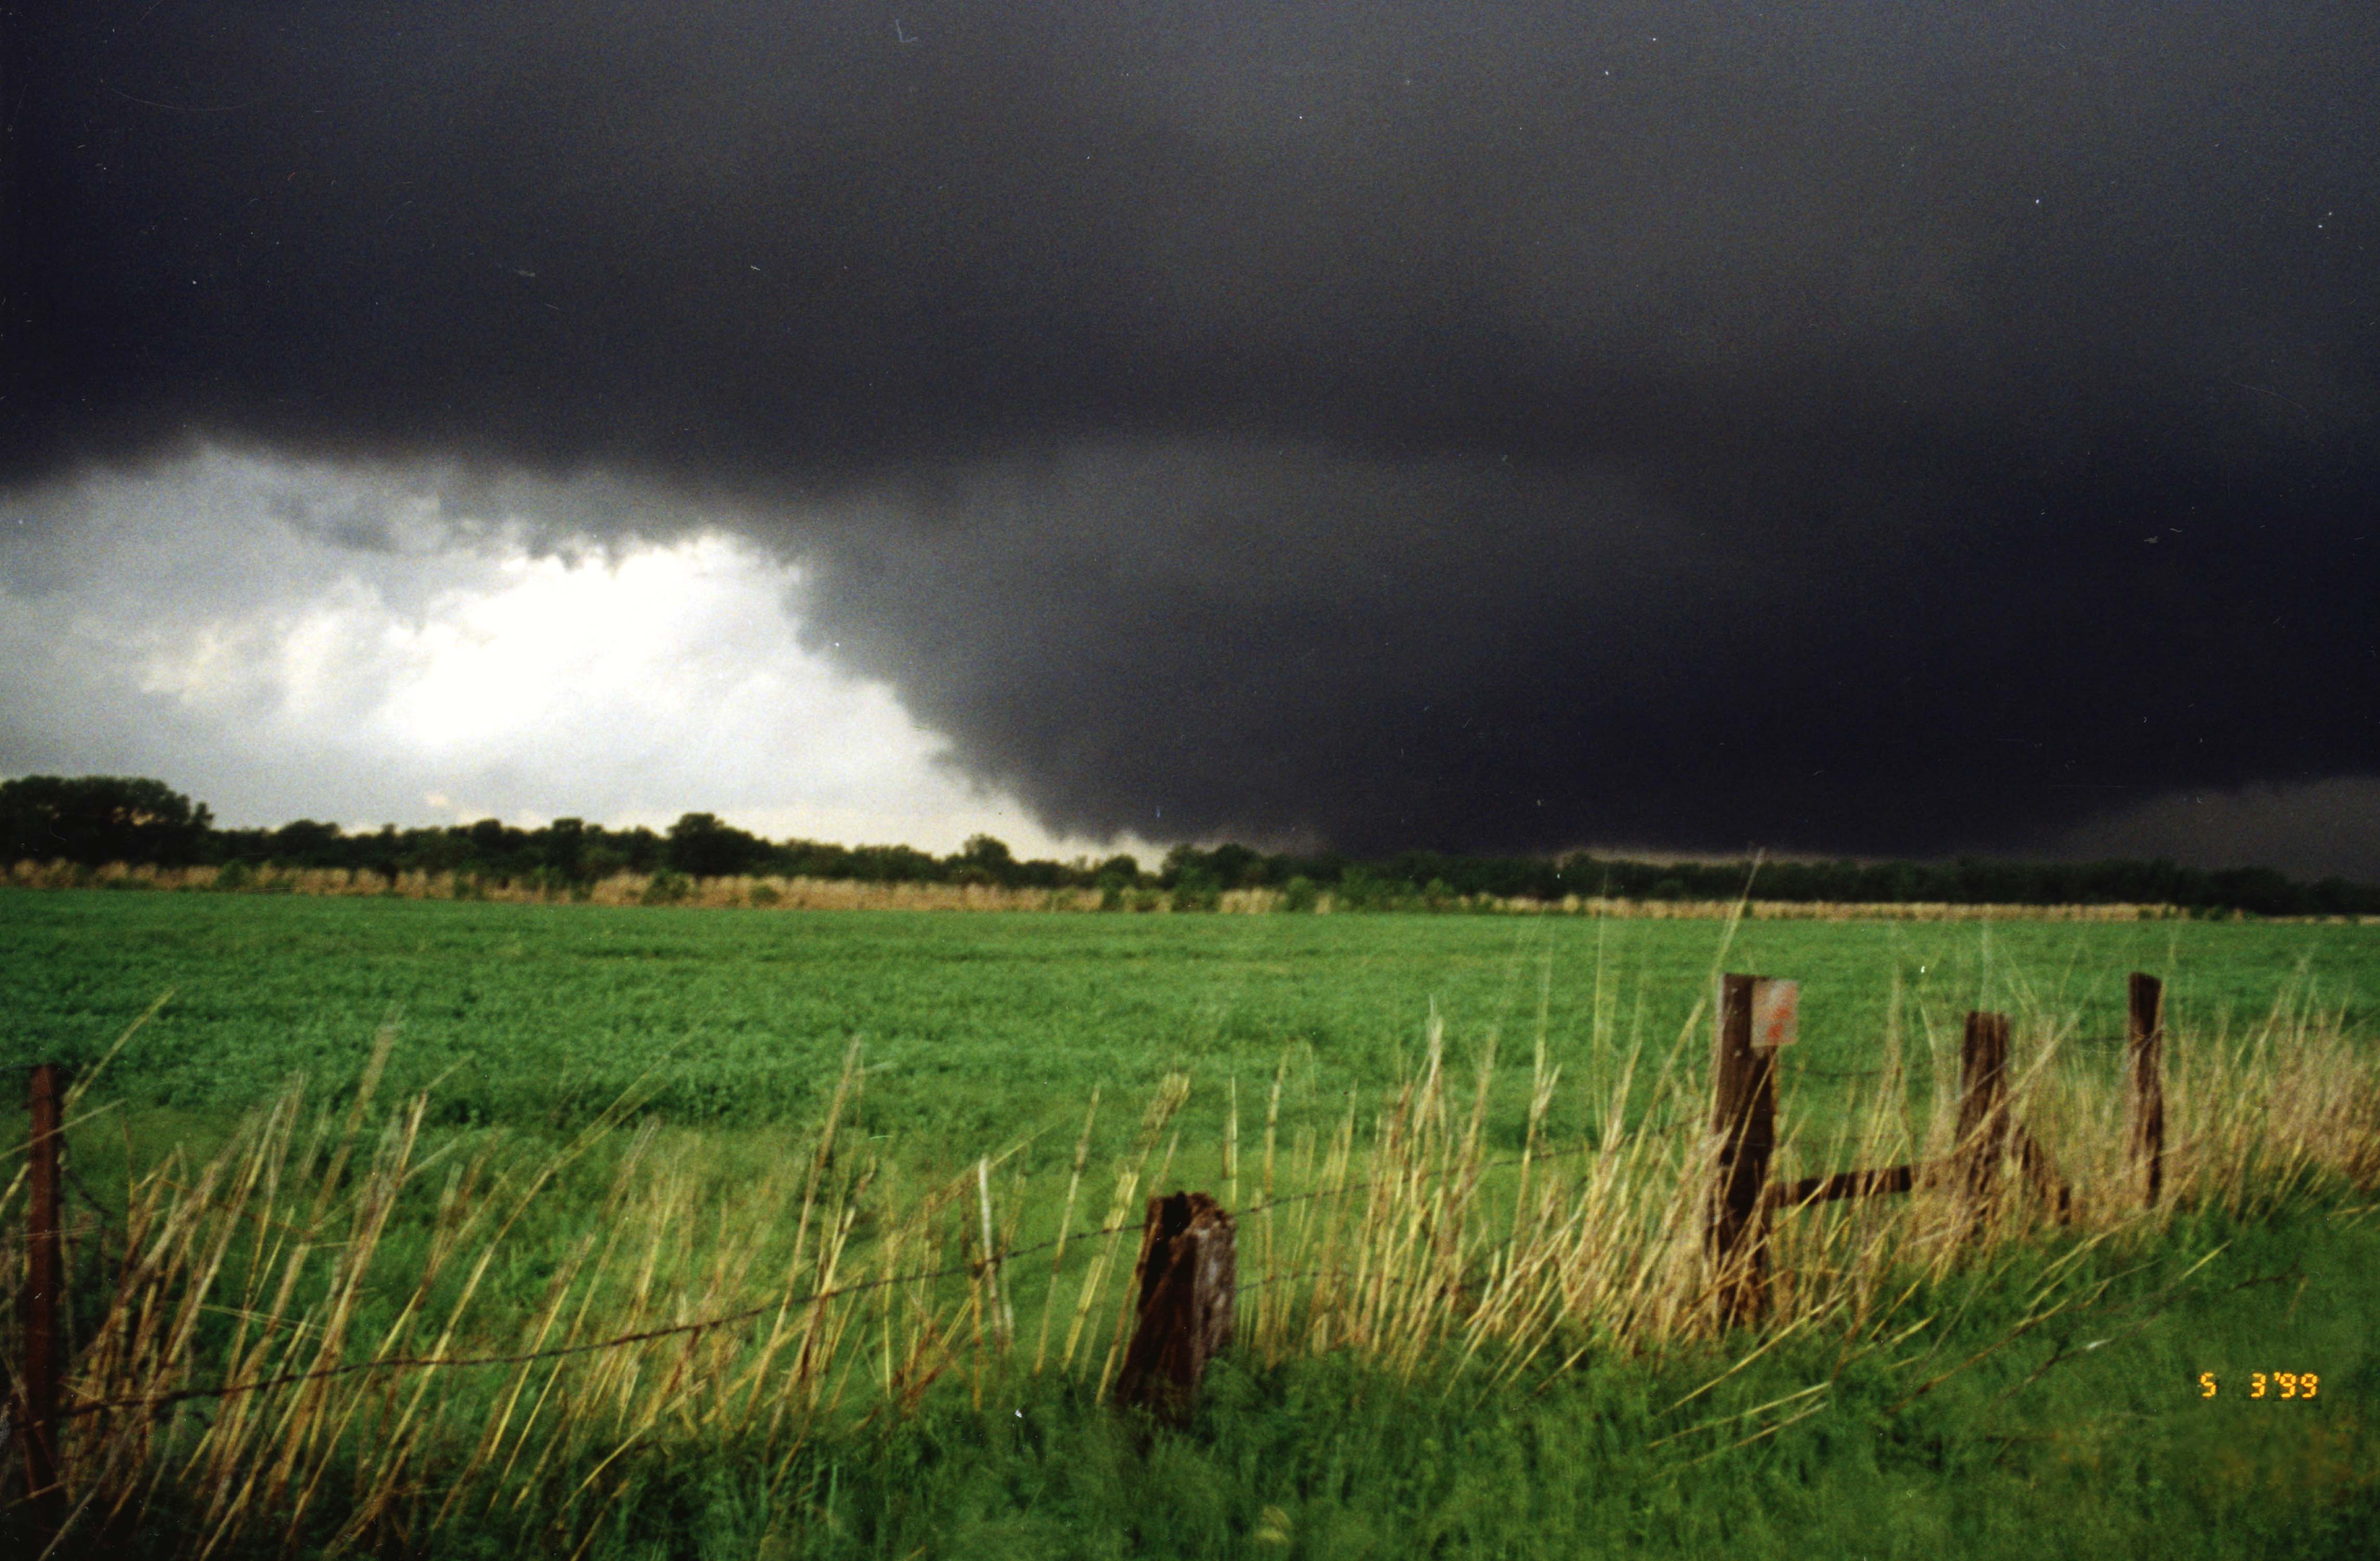 NOAA study shows pattern of fewer days with tornadoes, but more tornadoes on those days